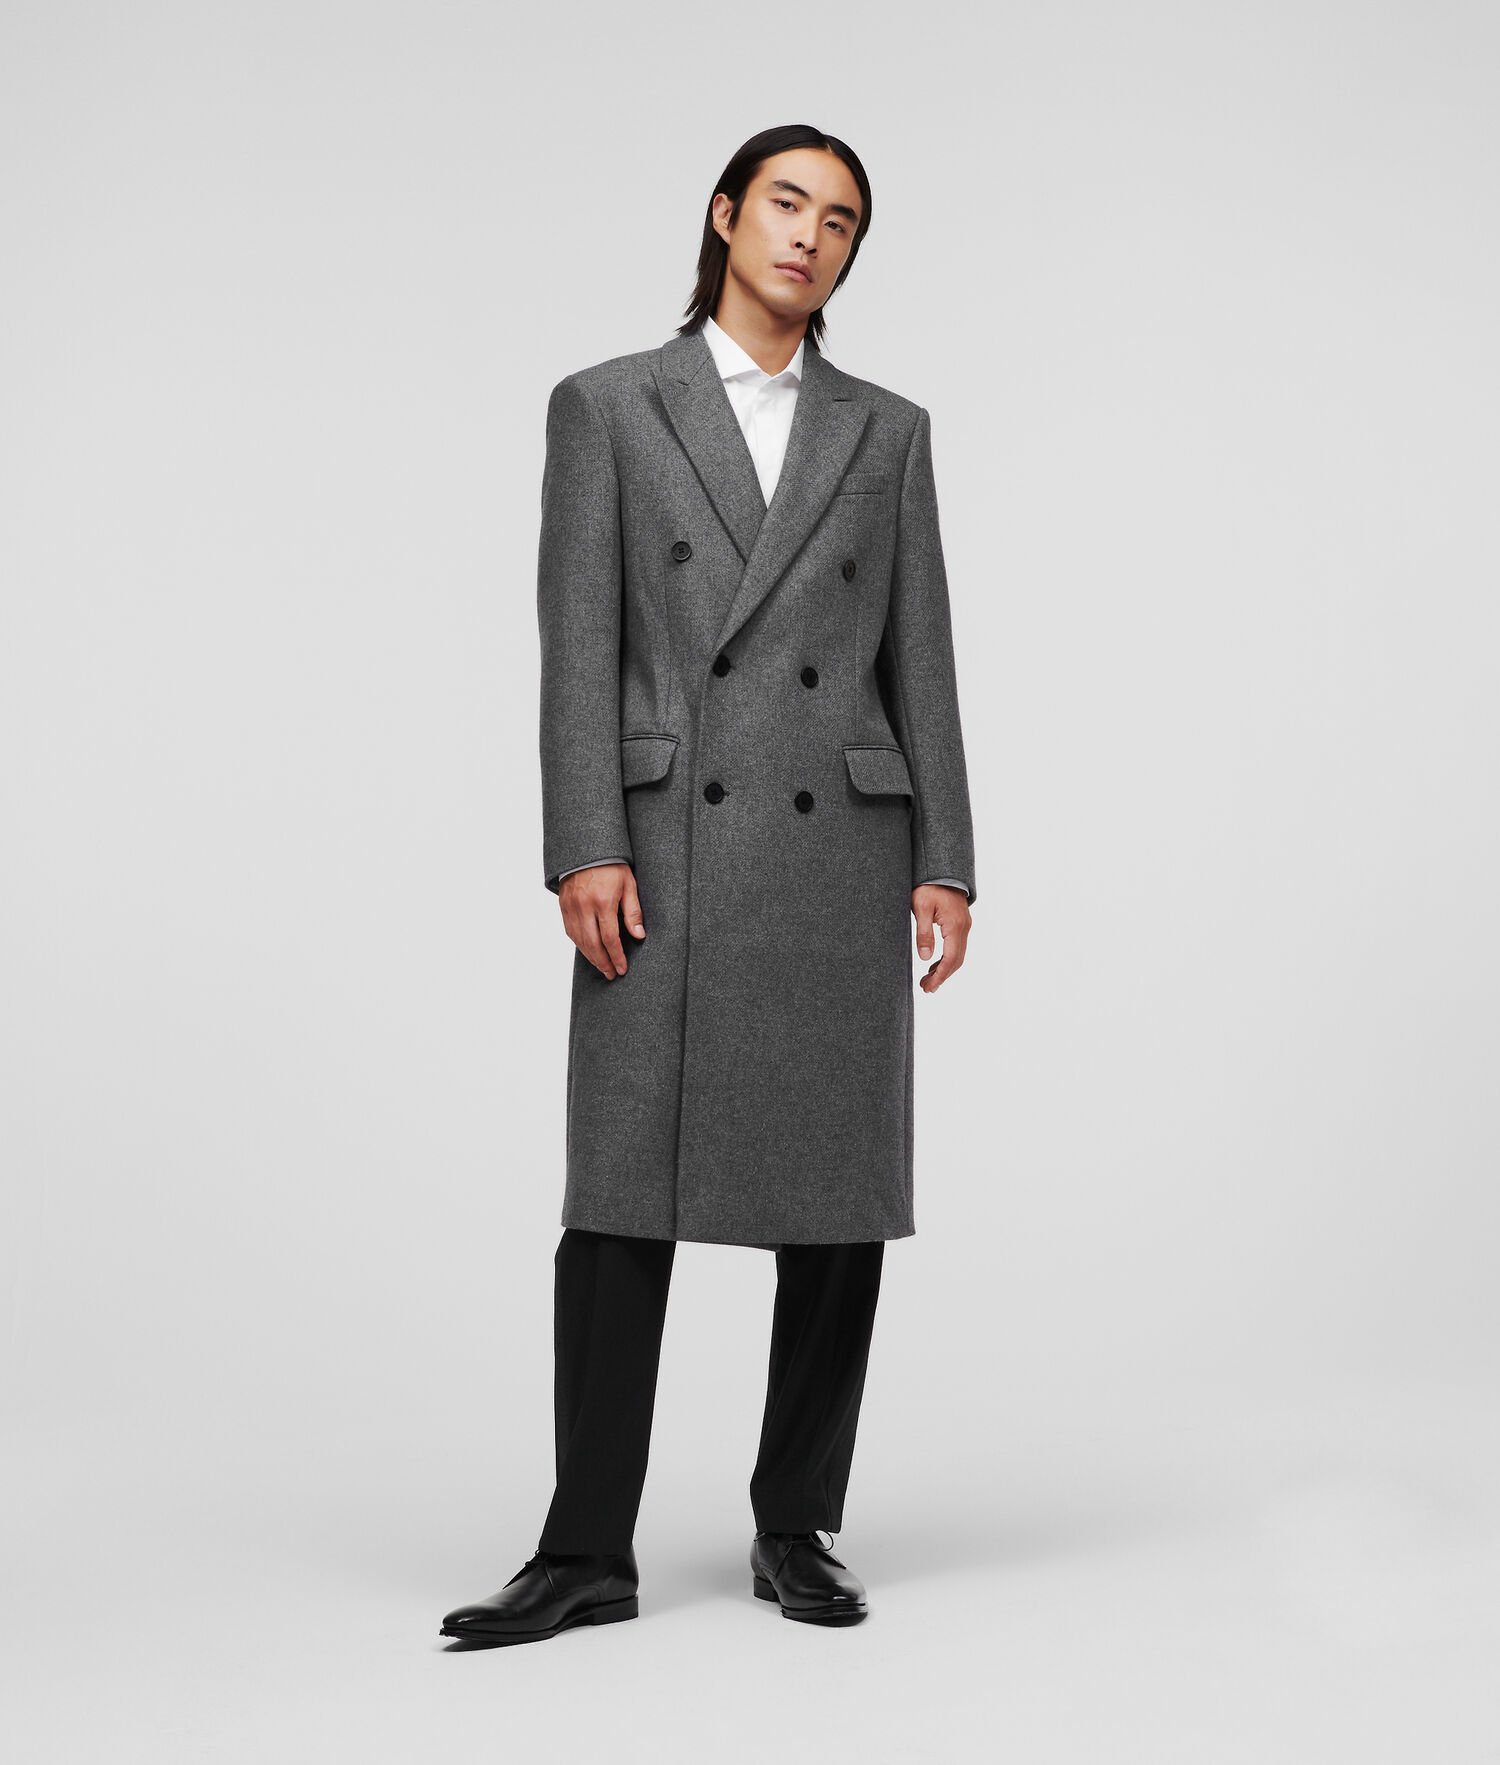 Karl Lagerfeld Coats Cheap Sale Online - Mens Double-breasted Tailored Grey